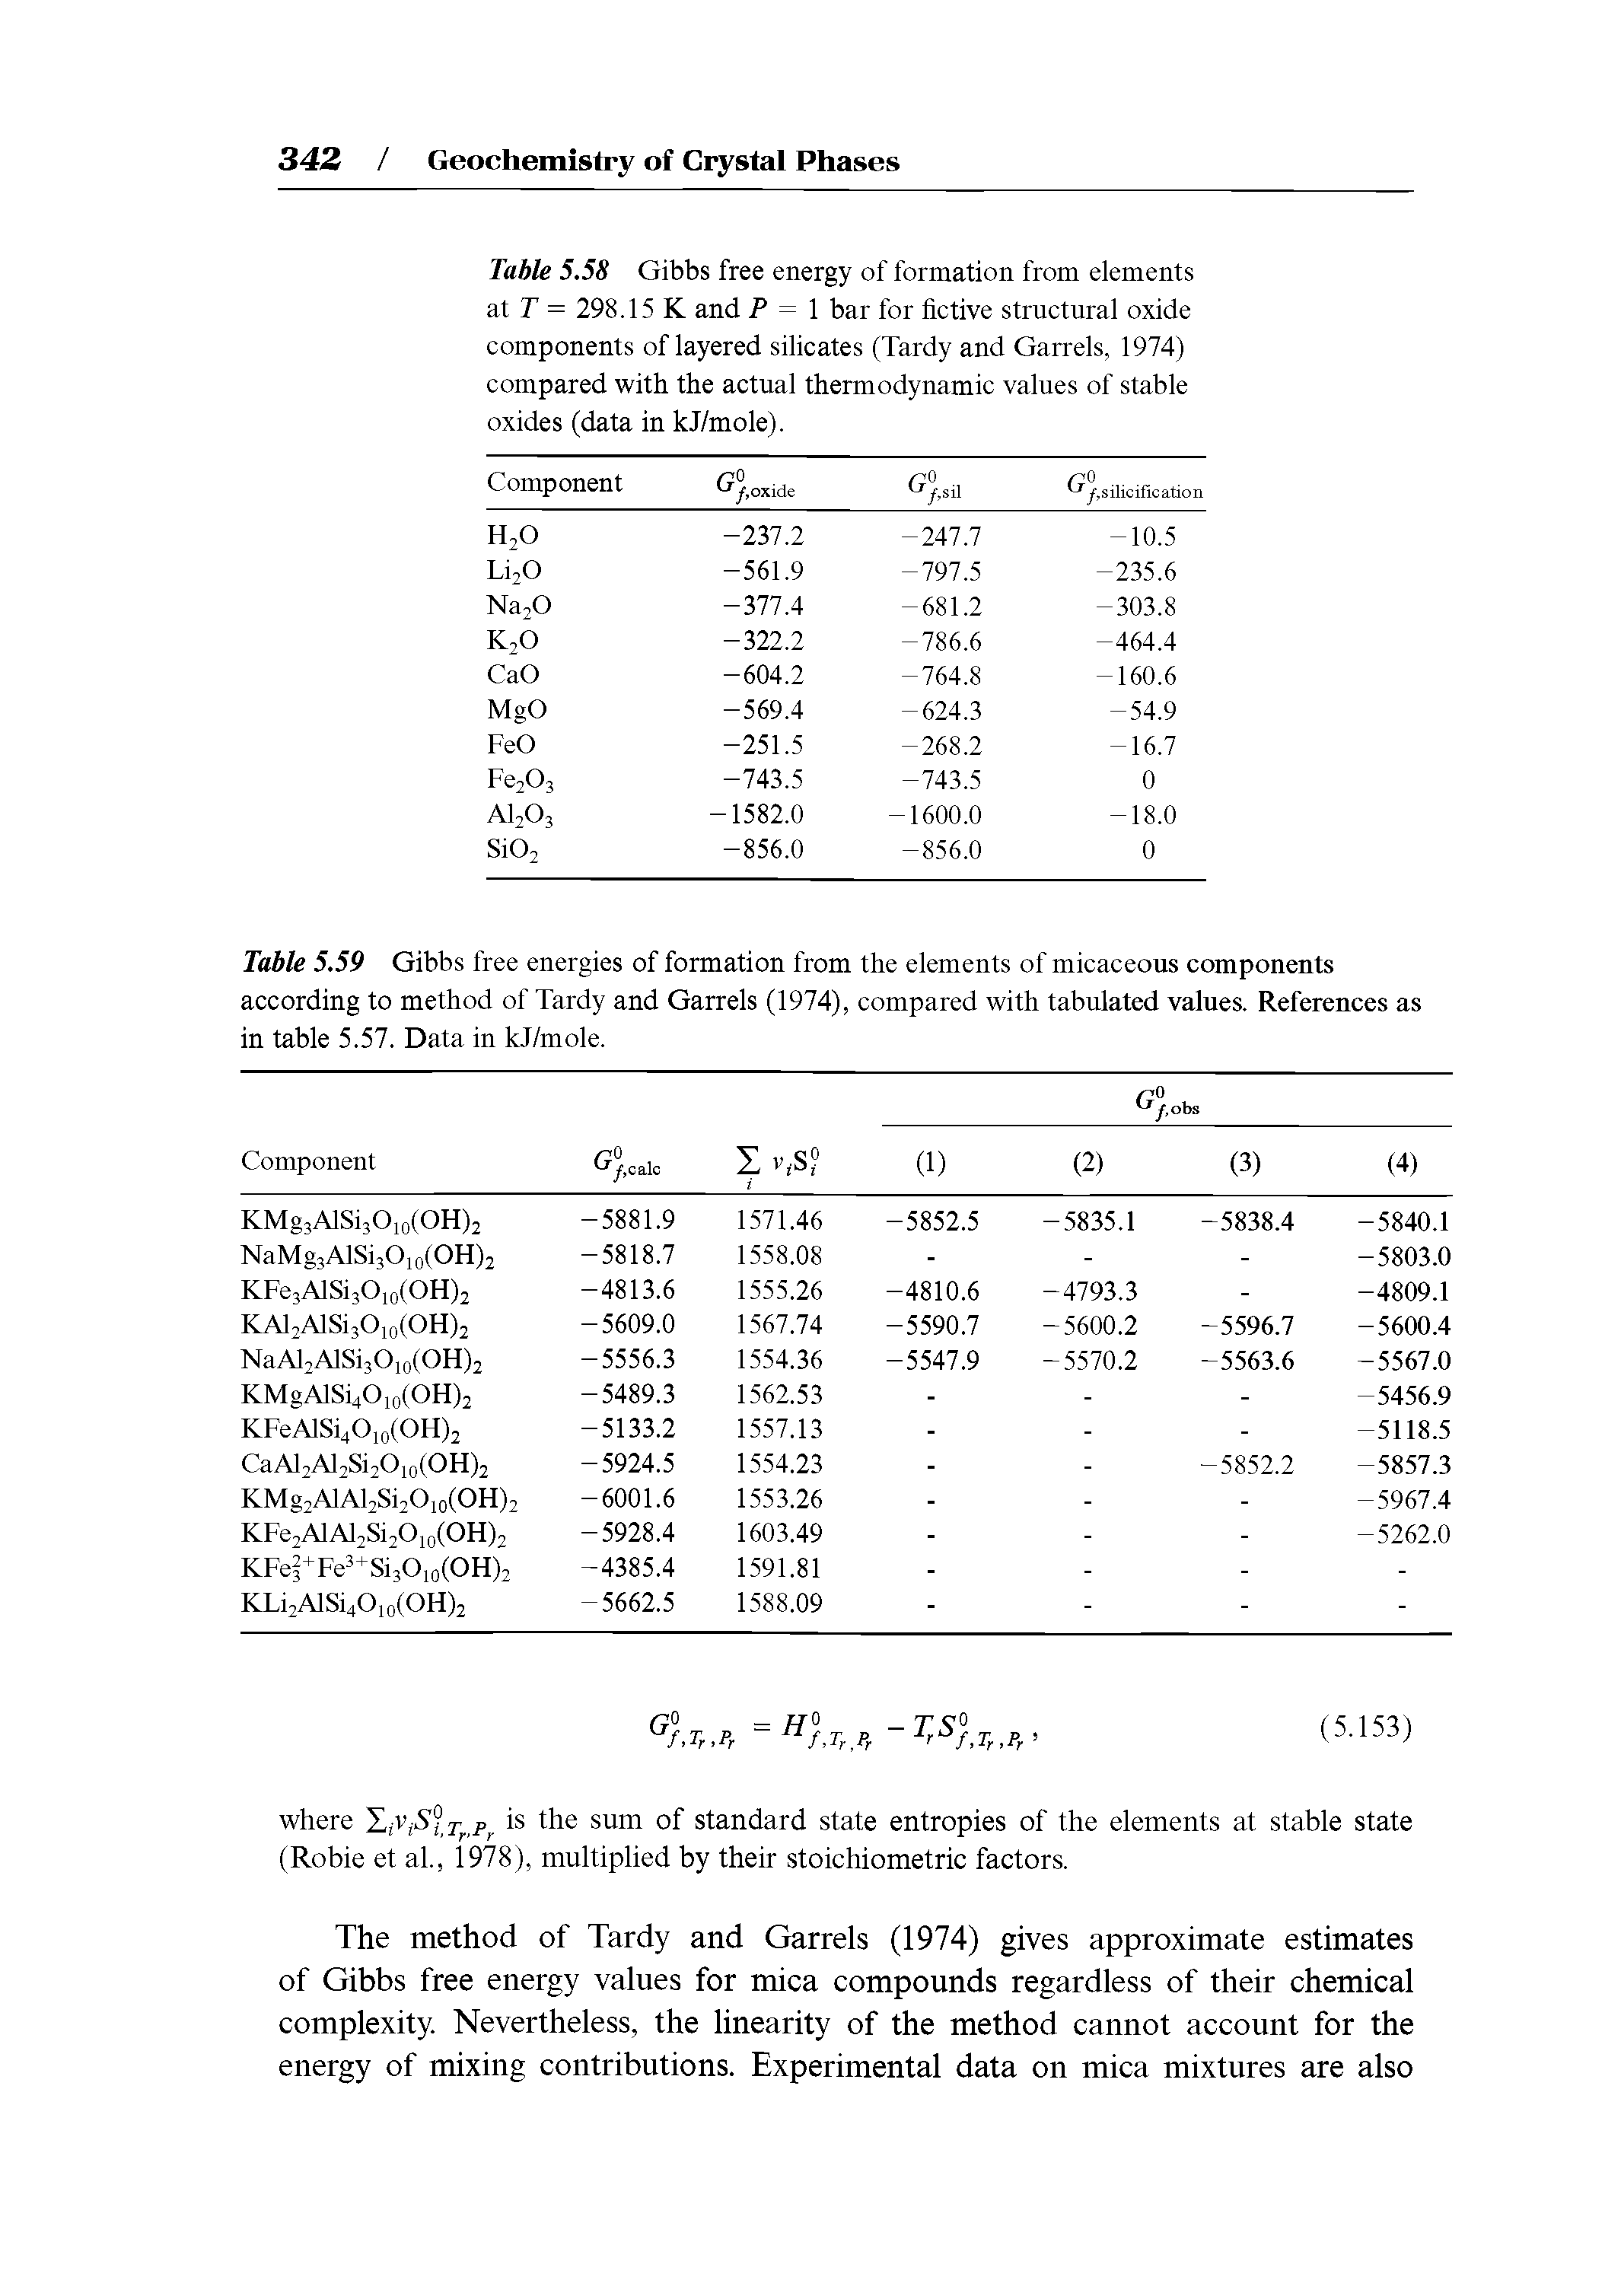 Table 5.58 Gibbs free energy of formation from elements at r = 298.15 K and P = 1 bar for fictive structural oxide components of layered silicates (Tardy and Garrels, 1974) compared with the actual thermodynamic values of stable oxides (data in kJ/mole). ...